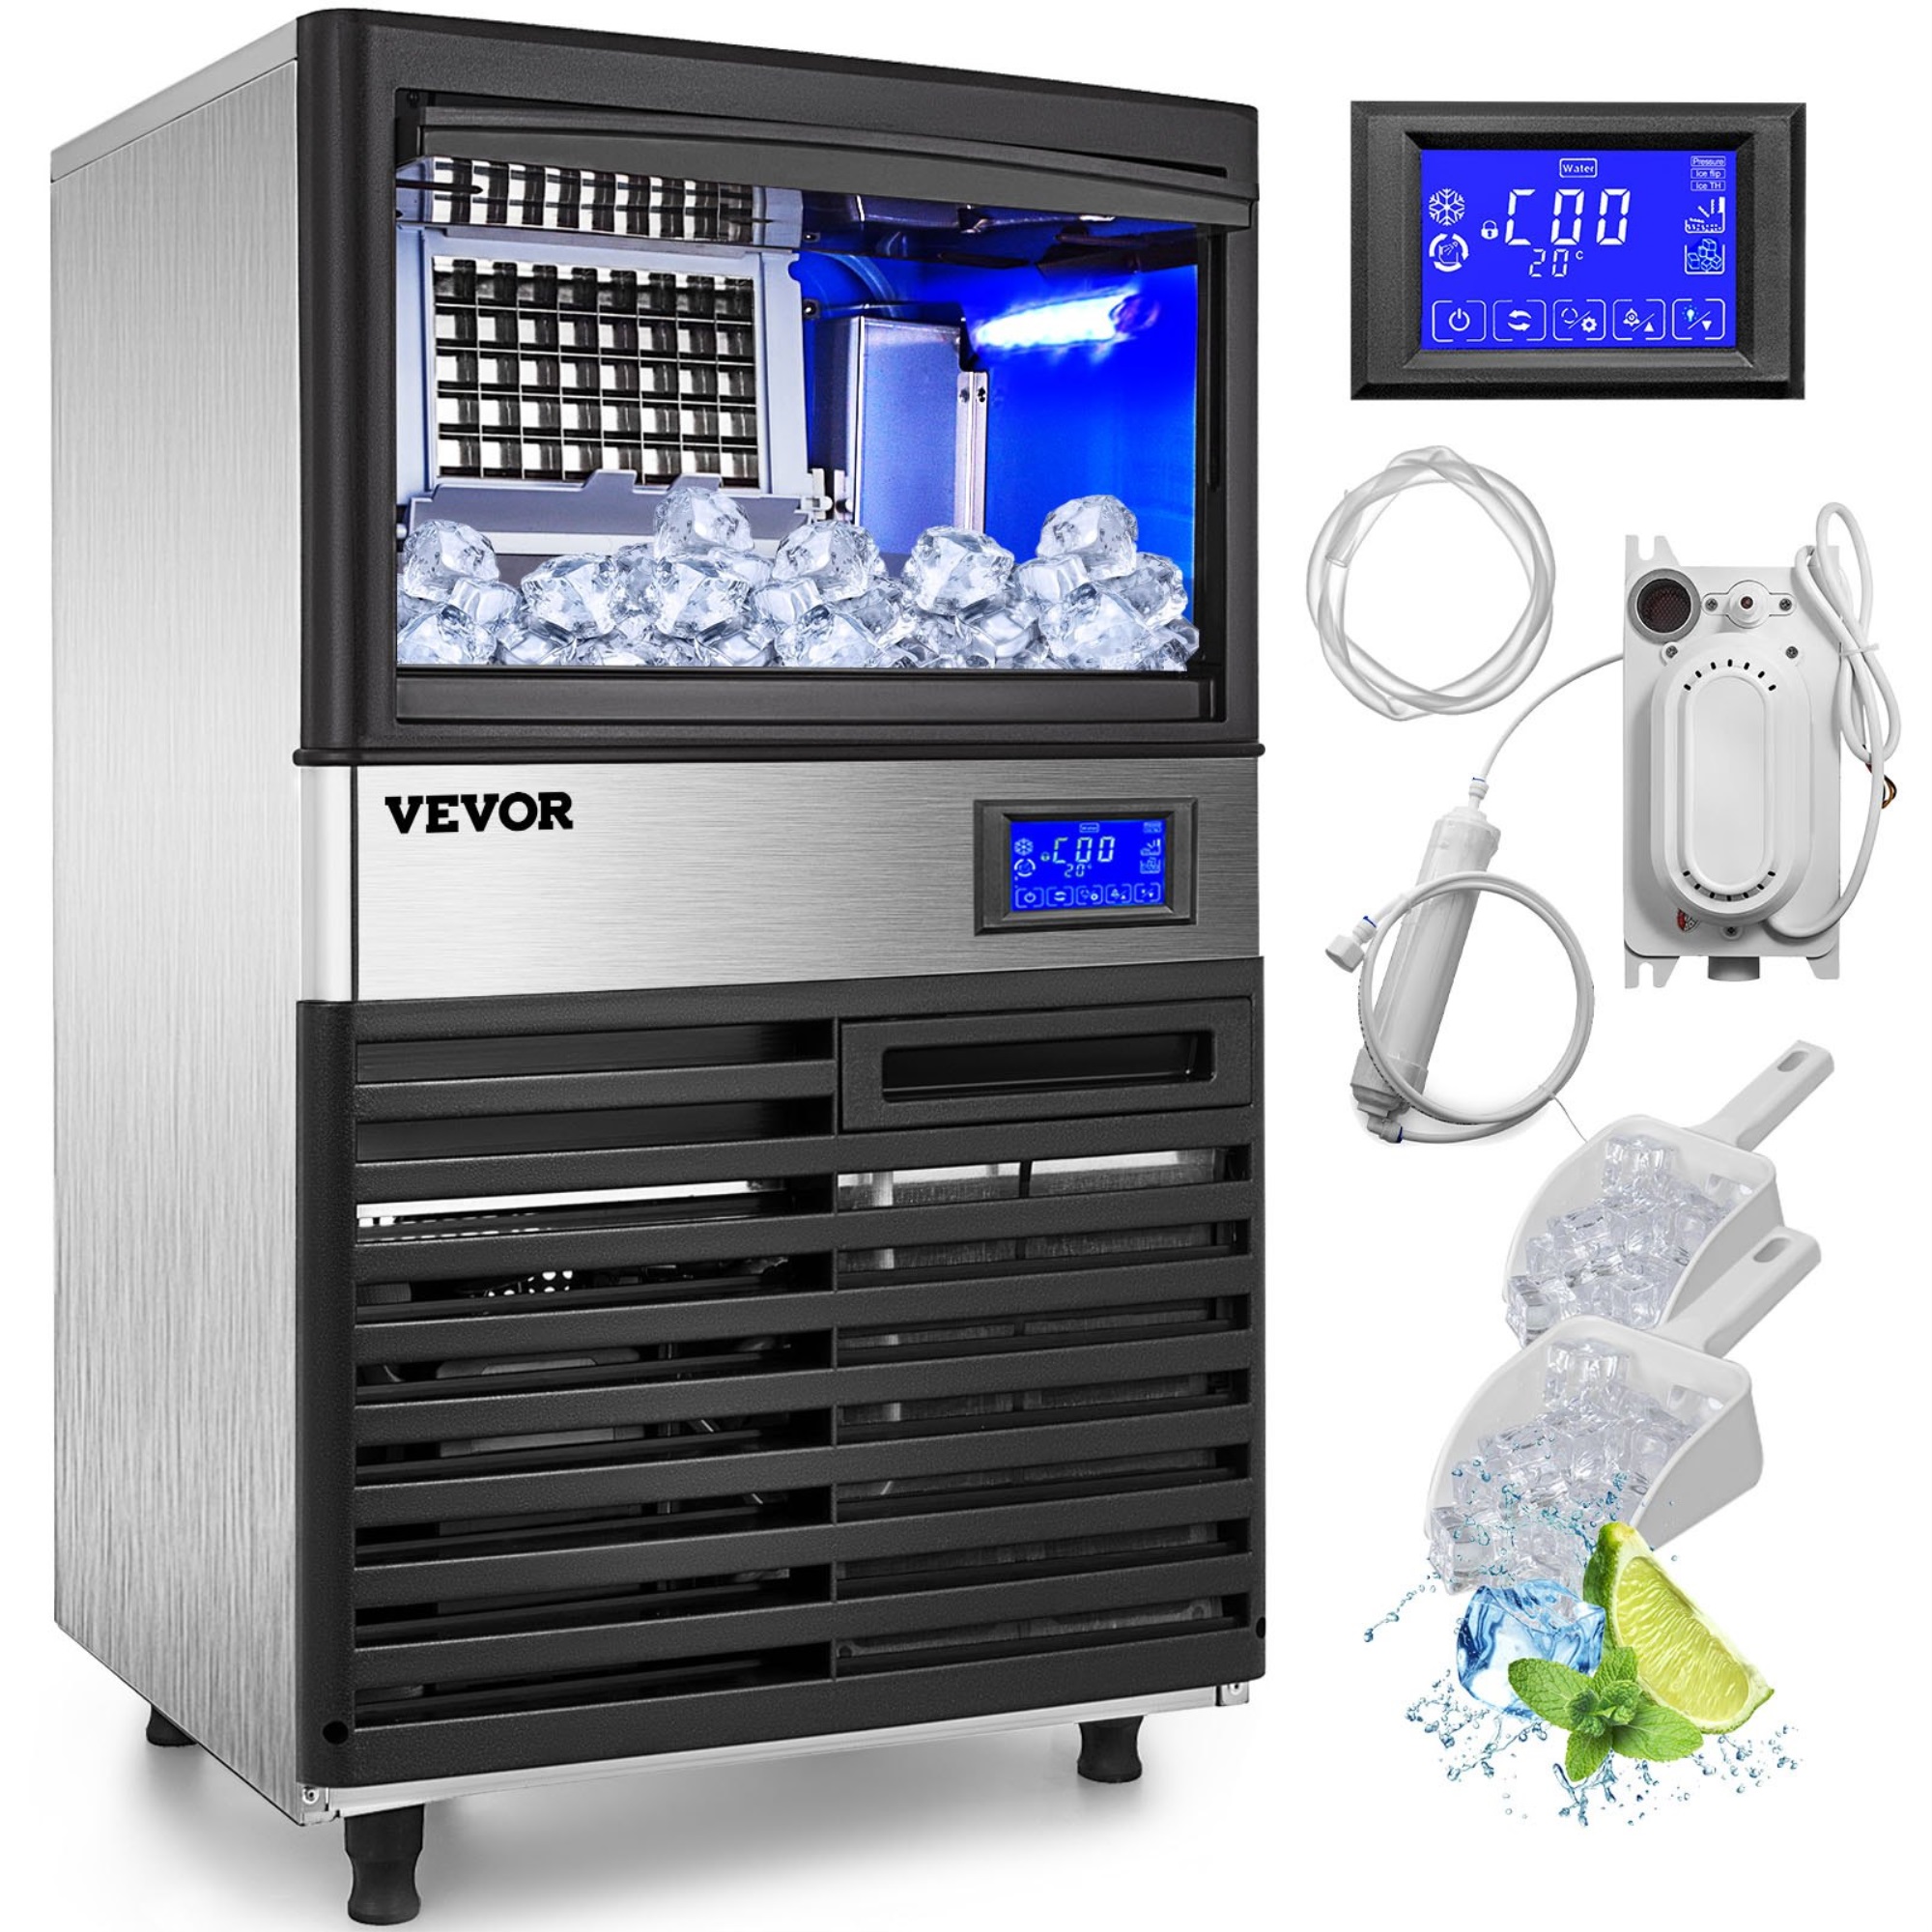 VEVOR 155lbs Ice Cube Maker Machine 70kg Commercial Microcomputer Lcd-control Panel